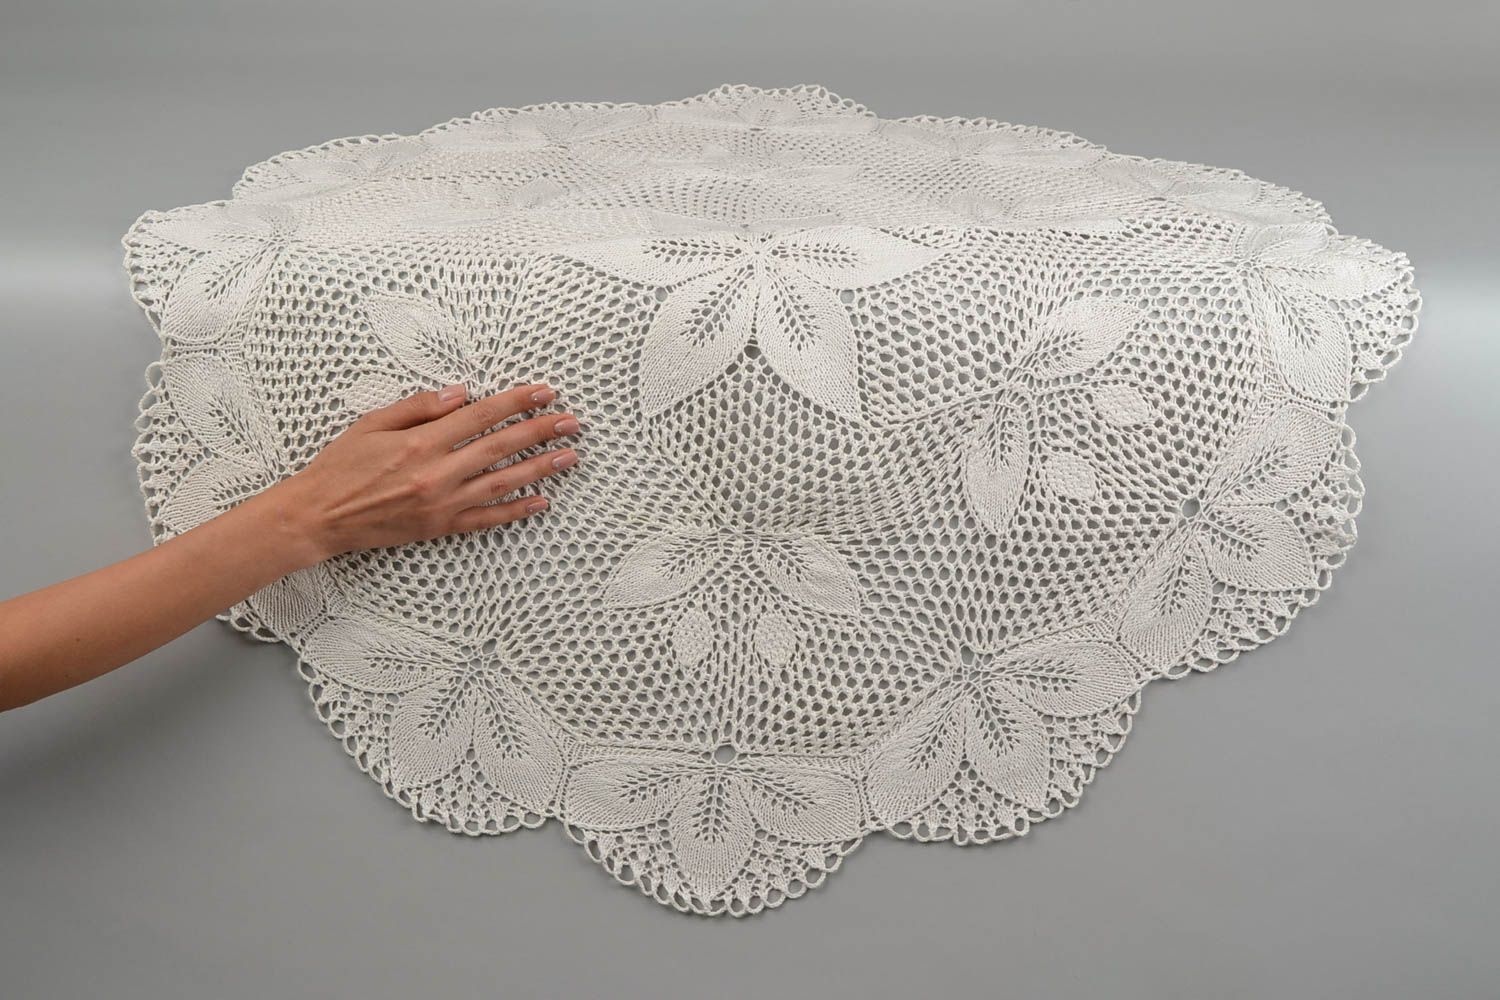 Openwork knitted tablecloth handmade lace napkin vintage style interior decor photo 2